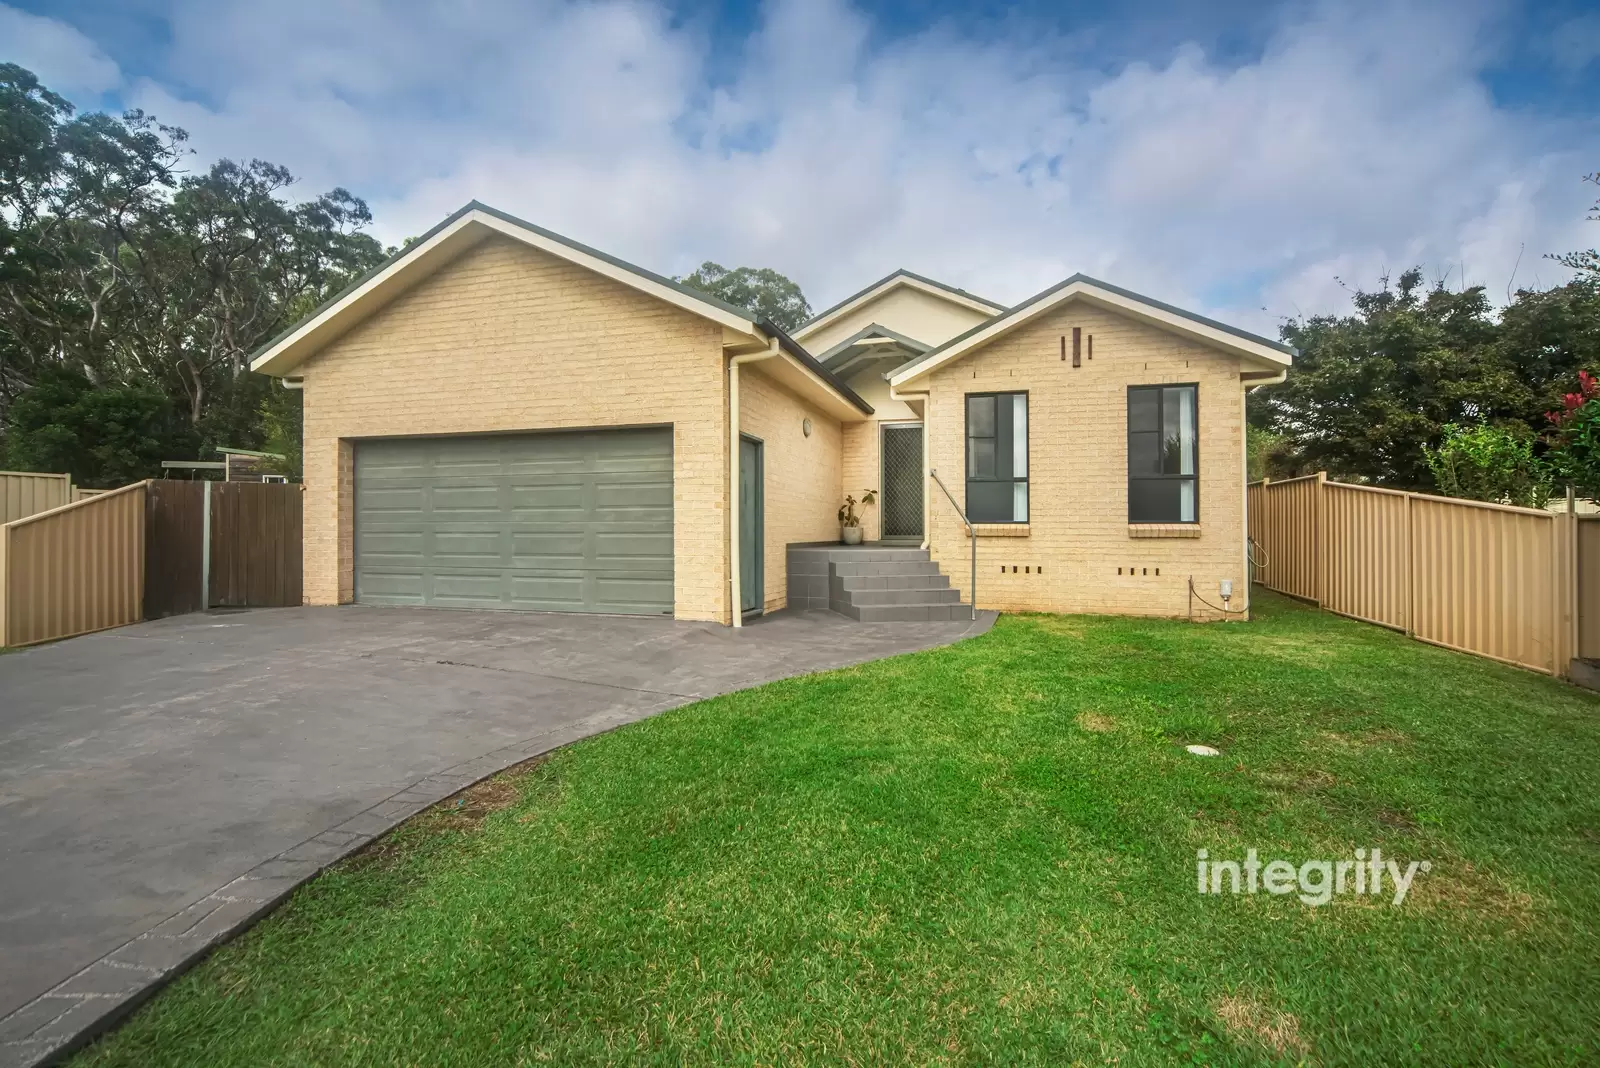 25 Karana Drive, North Nowra For Sale by Integrity Real Estate - image 1